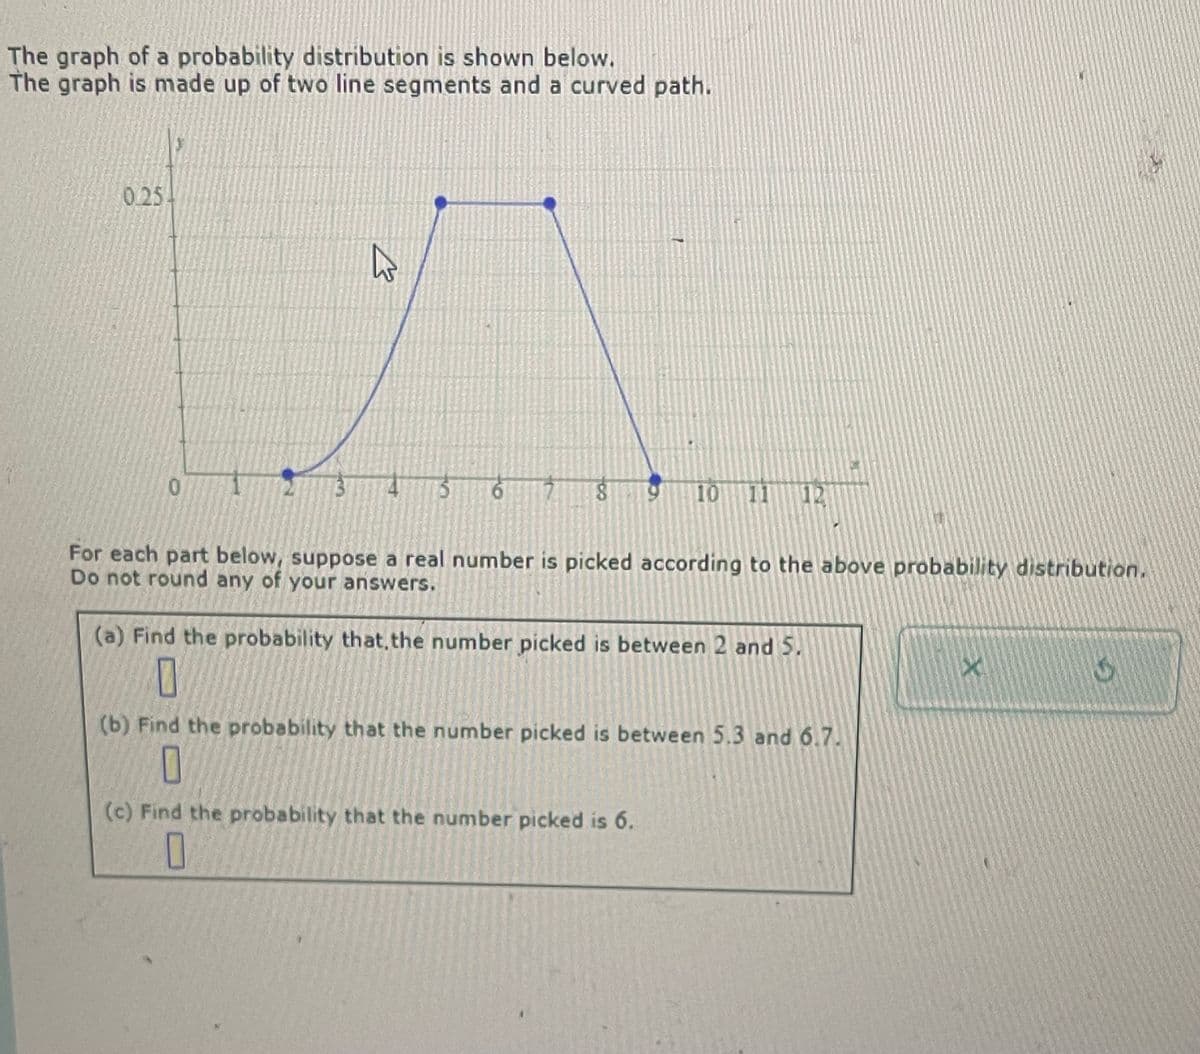 The graph of a probability distribution is shown below.
The graph is made up of two line segments and a curved path.
0.25
0
B
6
8
10
12
For each part below, suppose a real number is picked according to the above probability distribution.
Do not round any of your answers.
(a) Find the probability that, the number picked is between 2 and 5.
G
(b) Find the probability that the number picked is between 5.3 and 6.7.
(c) Find the probability that the number picked is 6.
☐